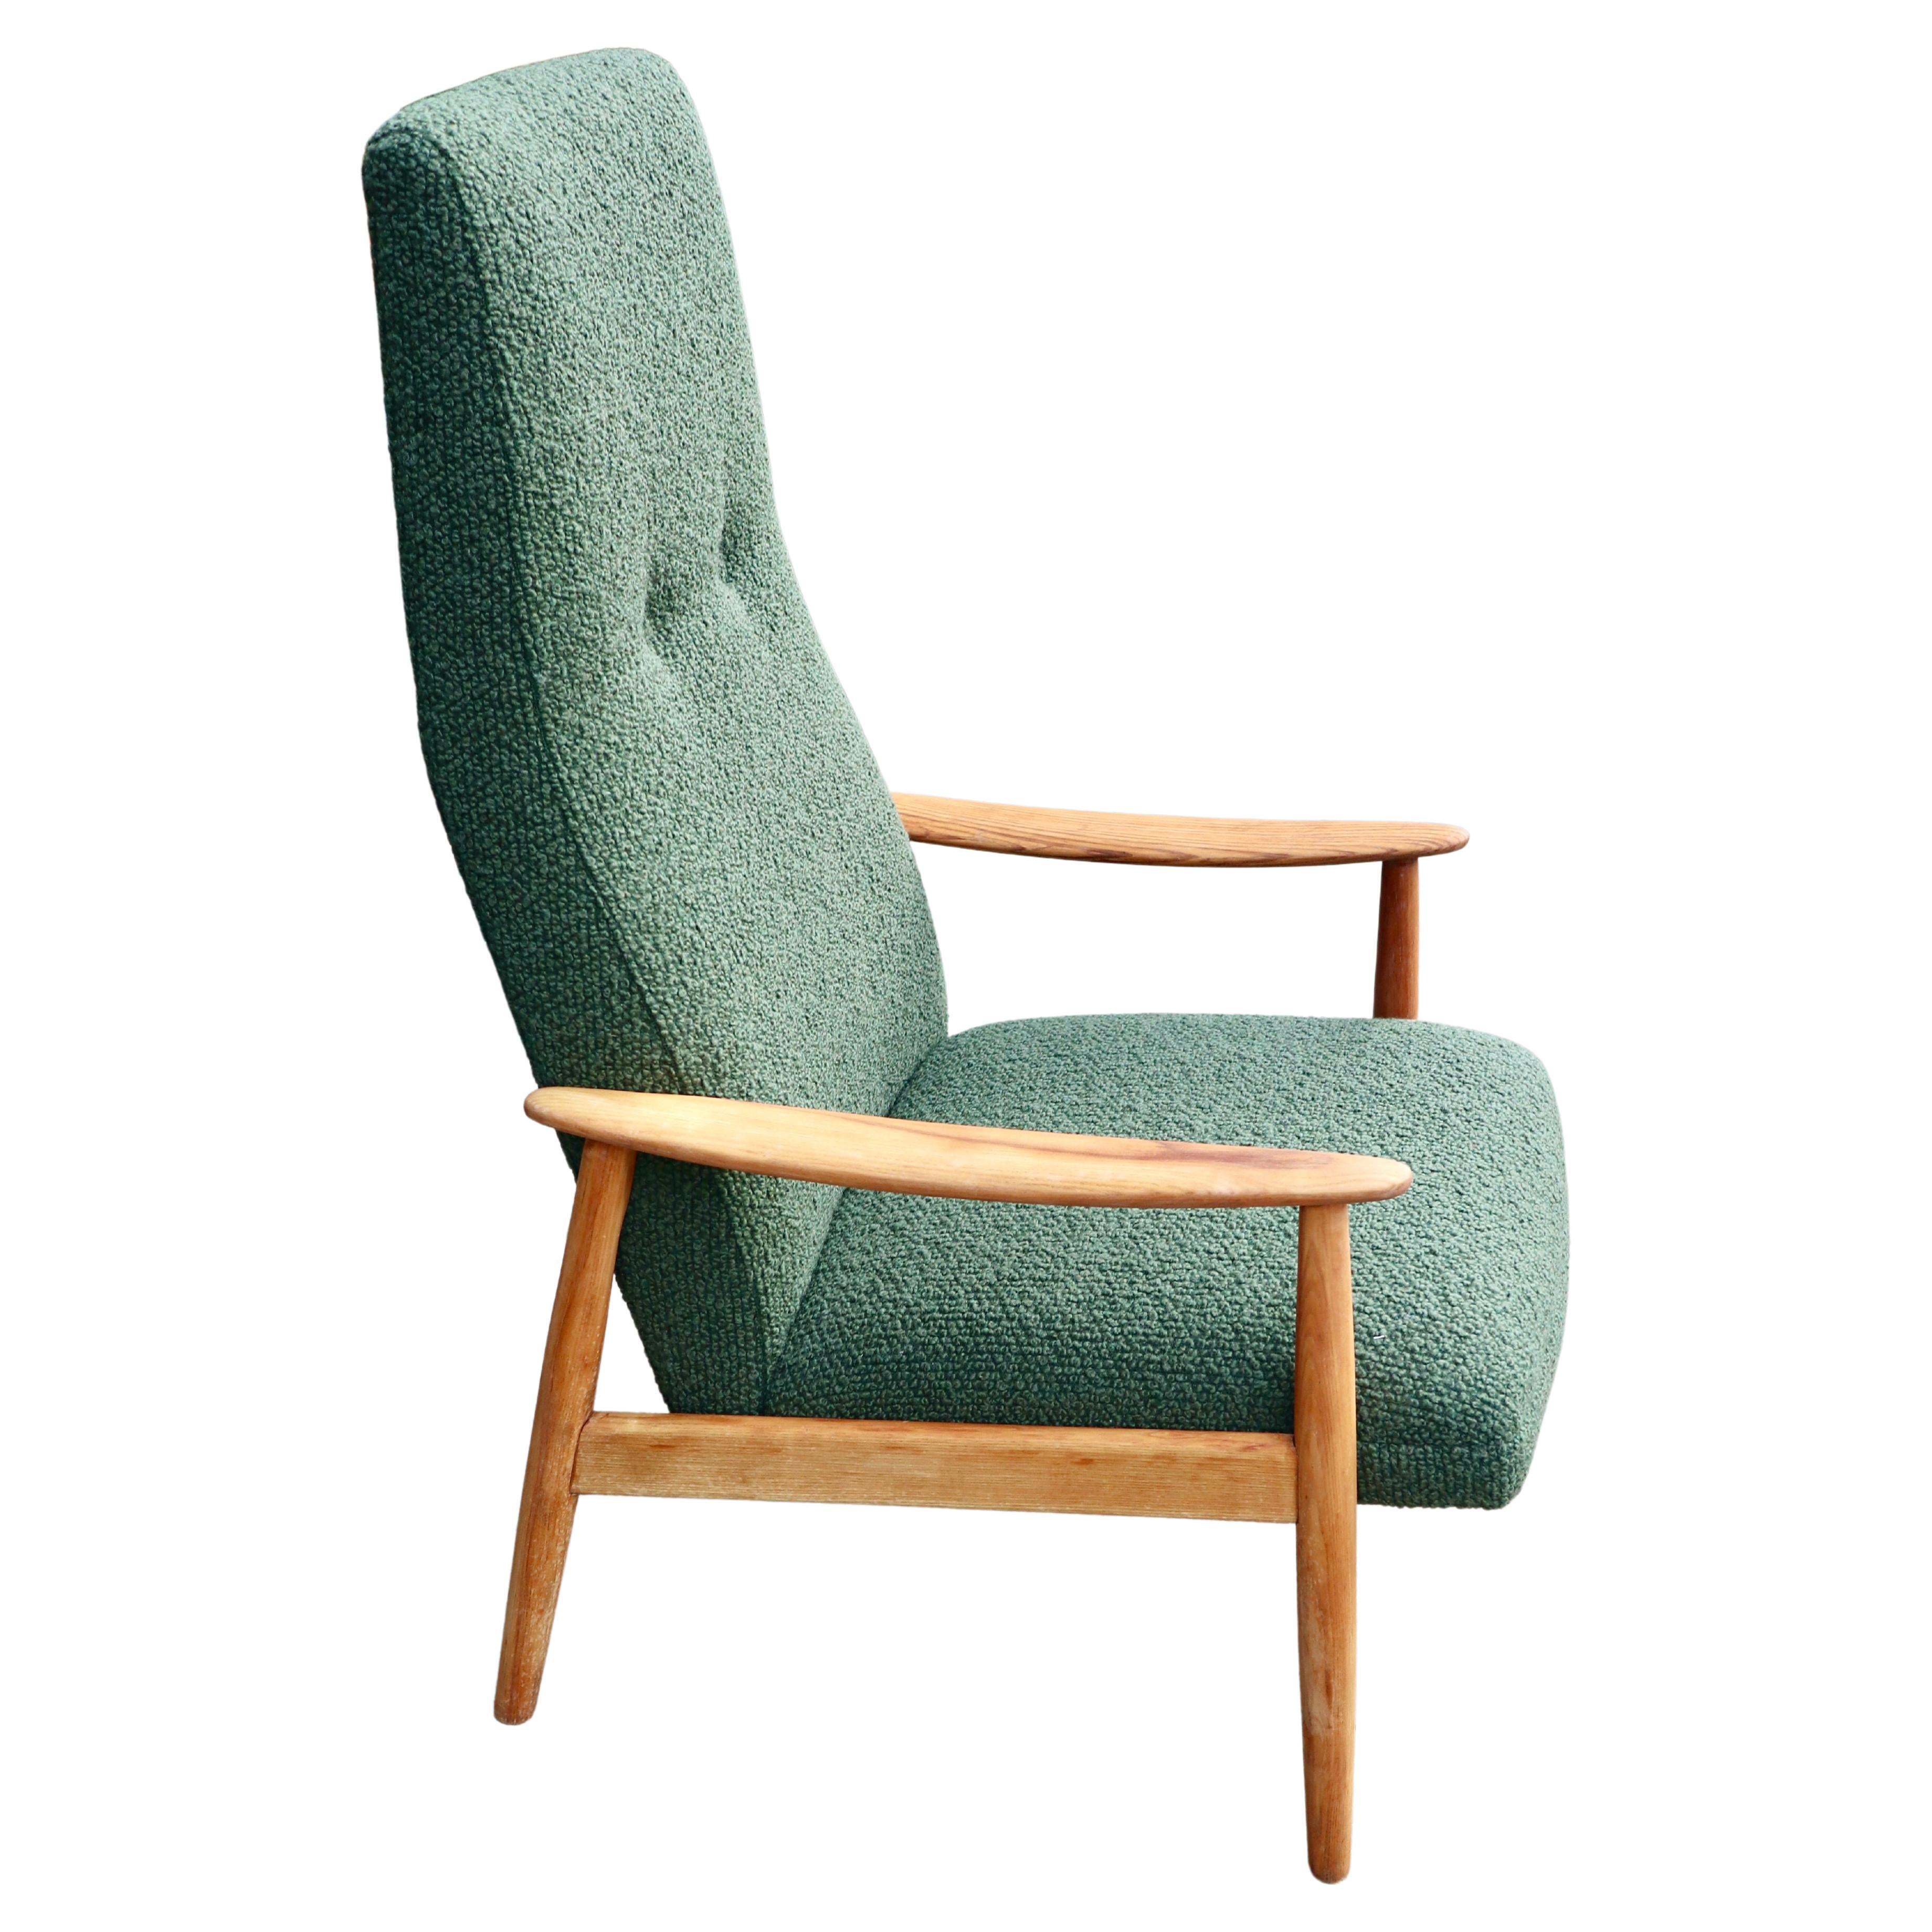 Vintage 1960s wood framed Danish lounge chair upholstered in moss green boucle. For Sale